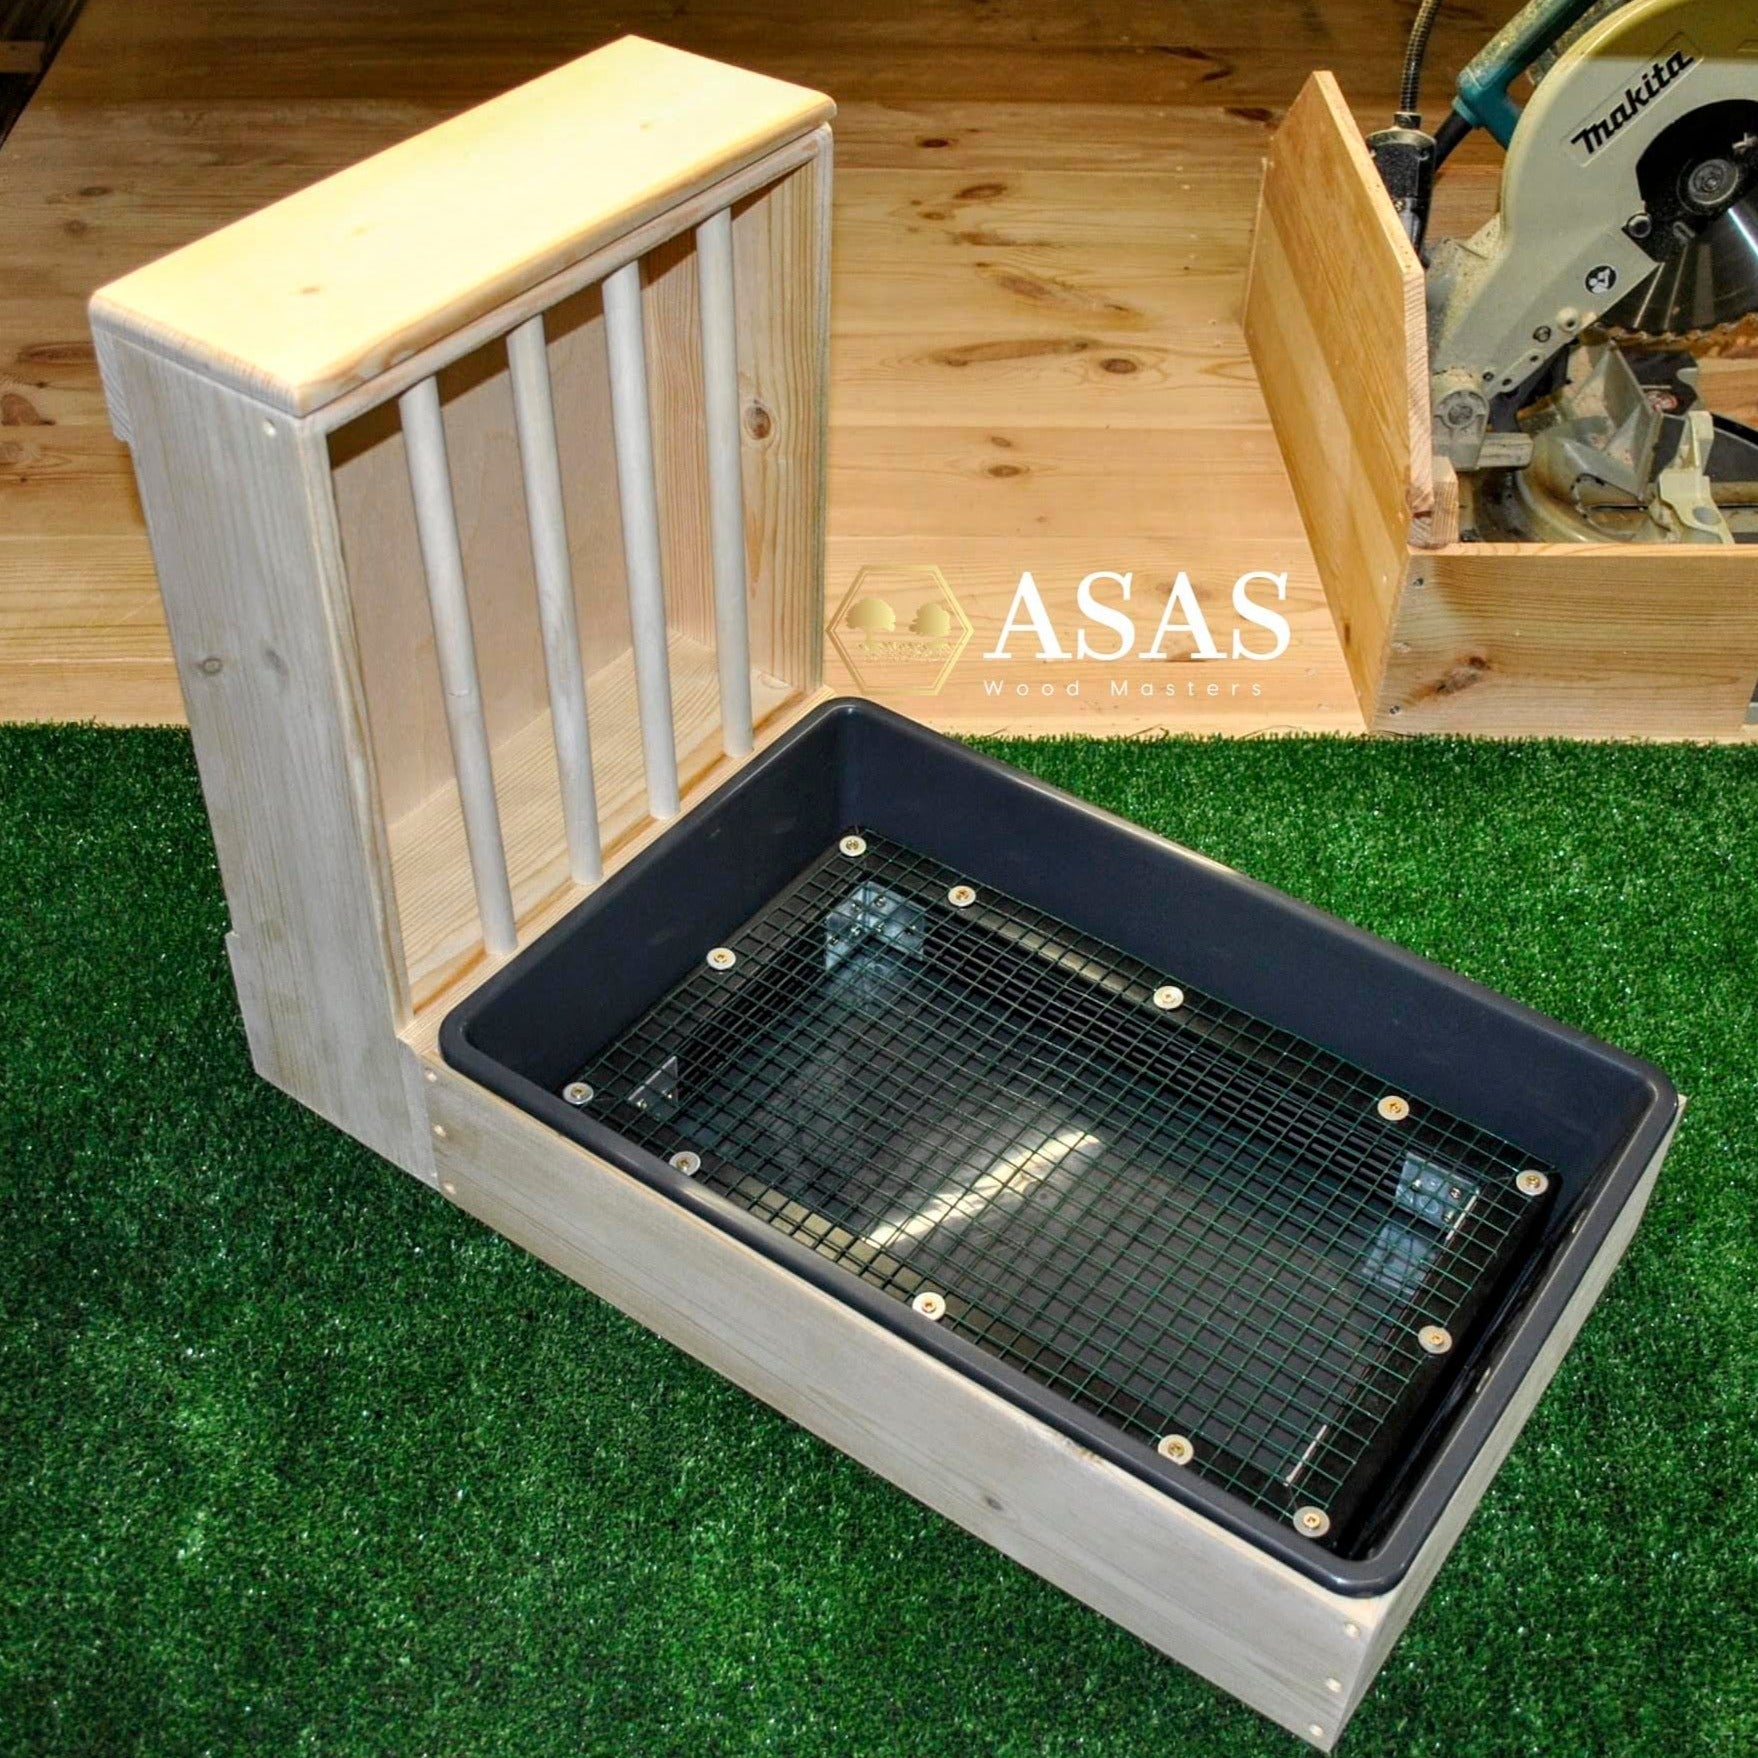 rabbit litter box large with wire mesh insert and wooden rabbit hay feeder, made by asaswood